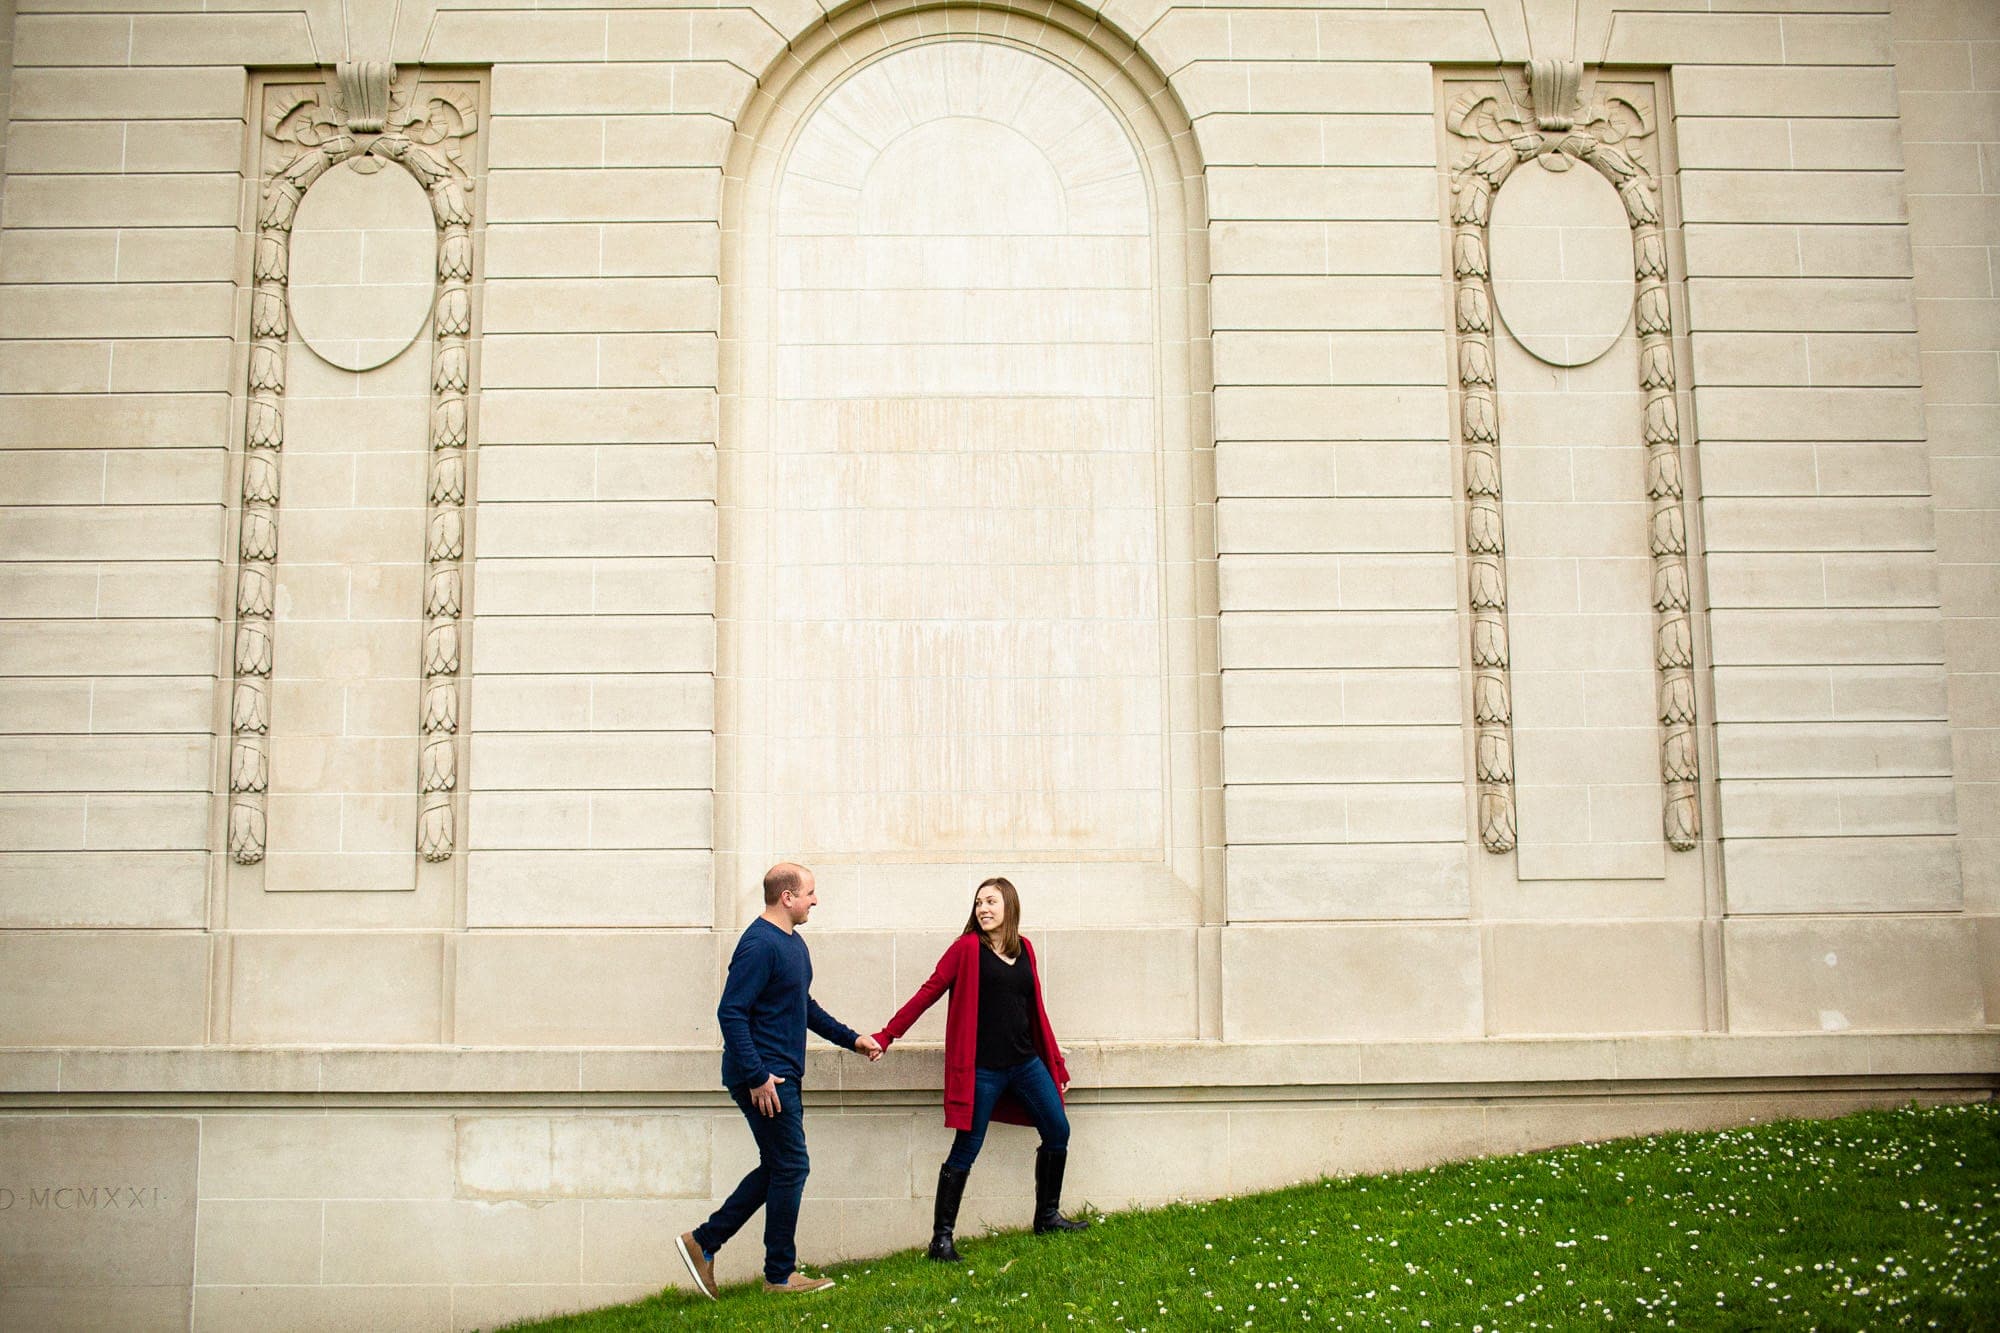 Woman leading man up a small hill next to a museum wall outside with green grass